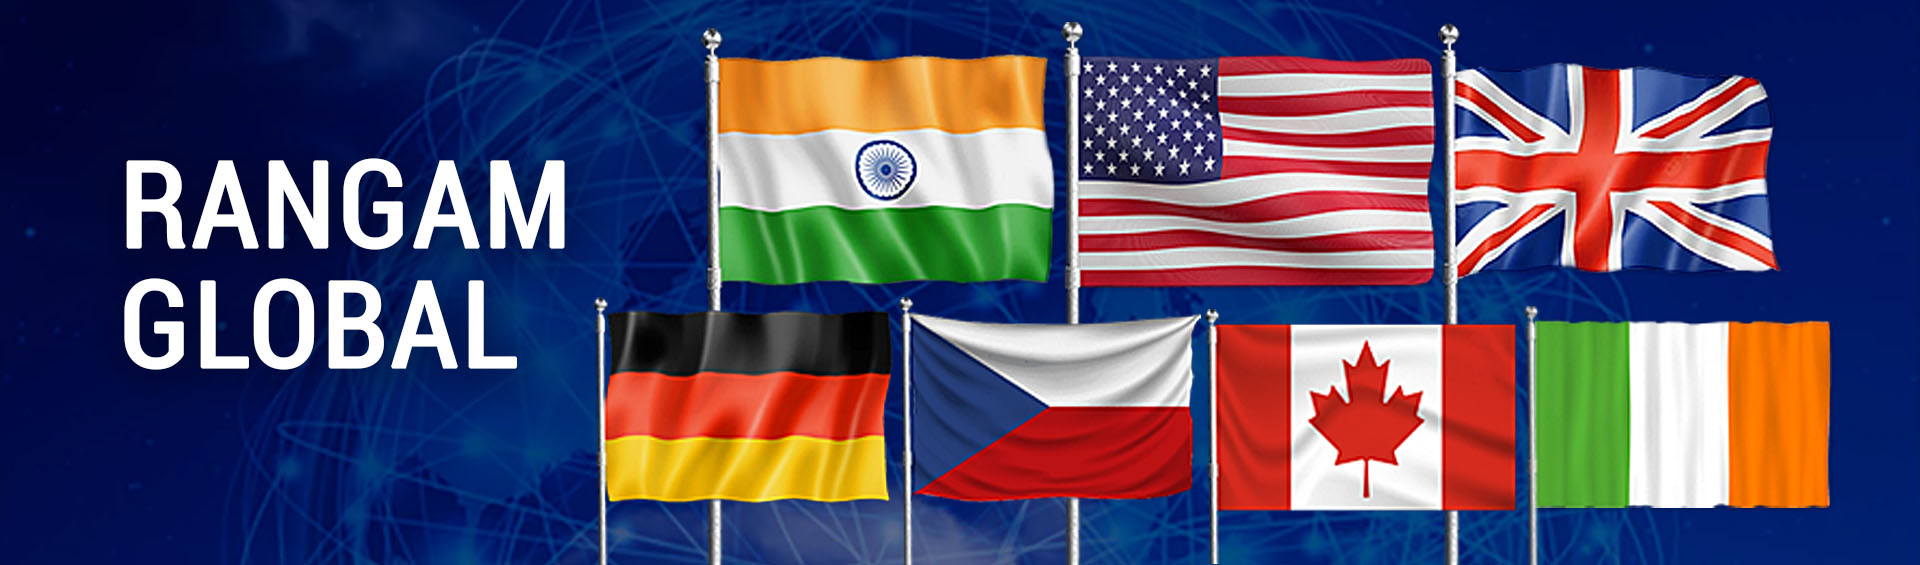 Flag of India, U.S.A, U.K., Germany, Czechia, Canada, and Ireland, representing the global presence of Rangam with a blue color background